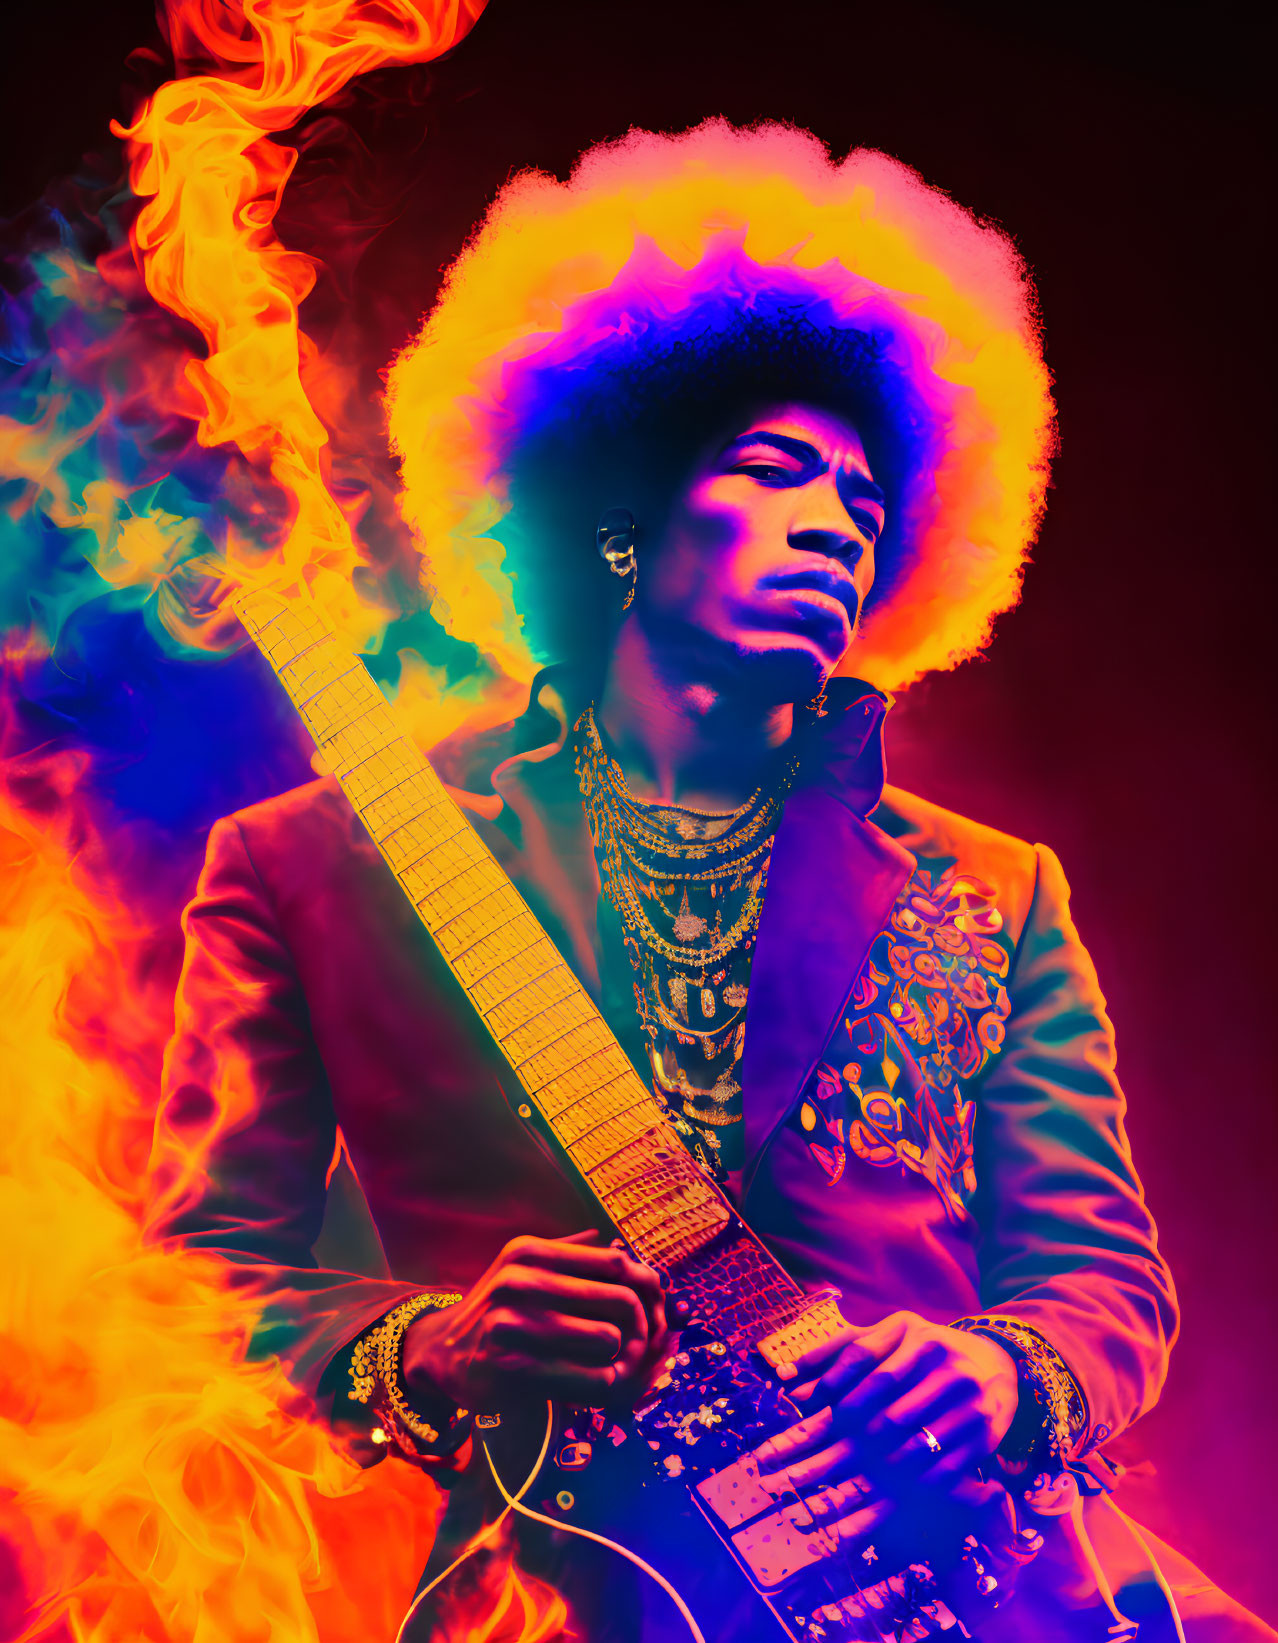 Colorful musician with afro playing electric guitar in fiery backdrop